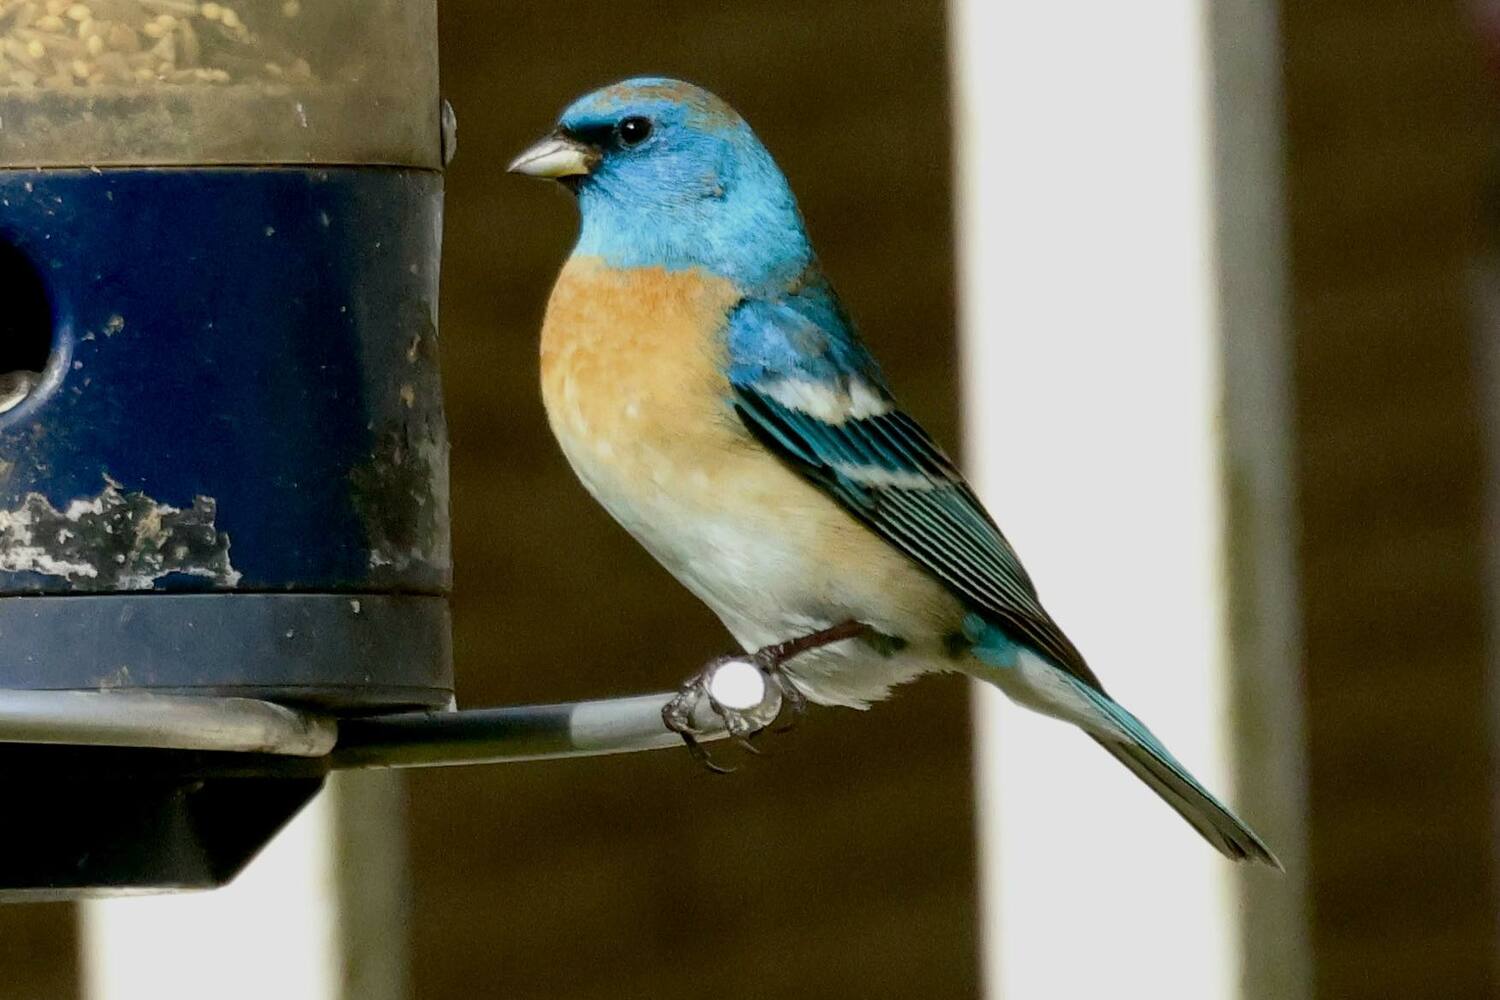 A Lazuli Bunting, a bird normally only seen out west, has been showing up to the bird feeder at Meigan Madden Rocco's home in Flanders for several days. It has drawn hundreds of birders to her home. She and her family have affectionately named the bird 